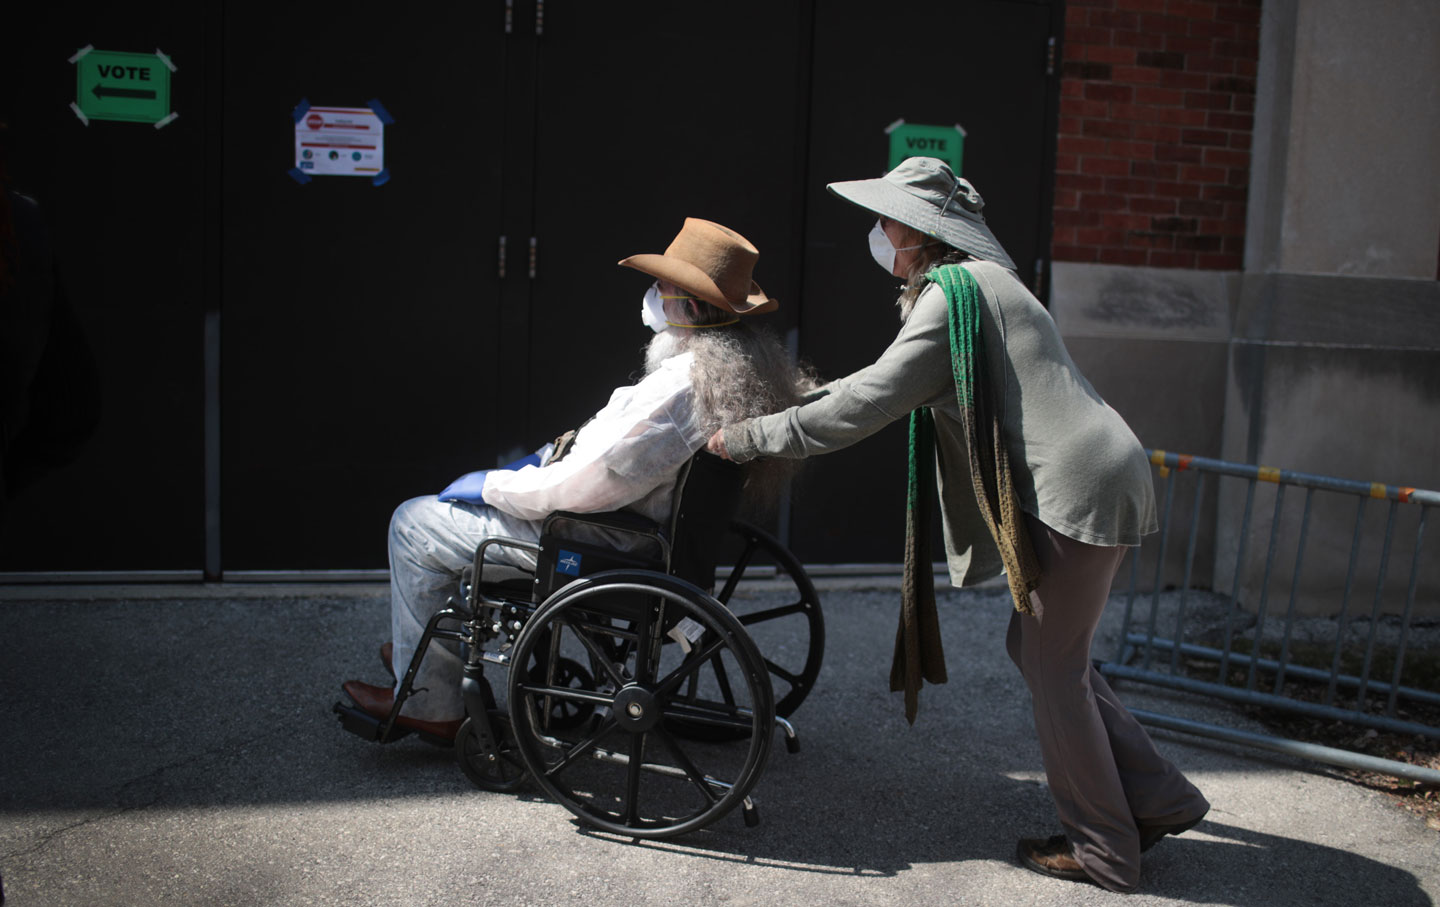 A person in wheelchair, being pushed by another person, waiting to cast their vote in the Wisconsin primary election